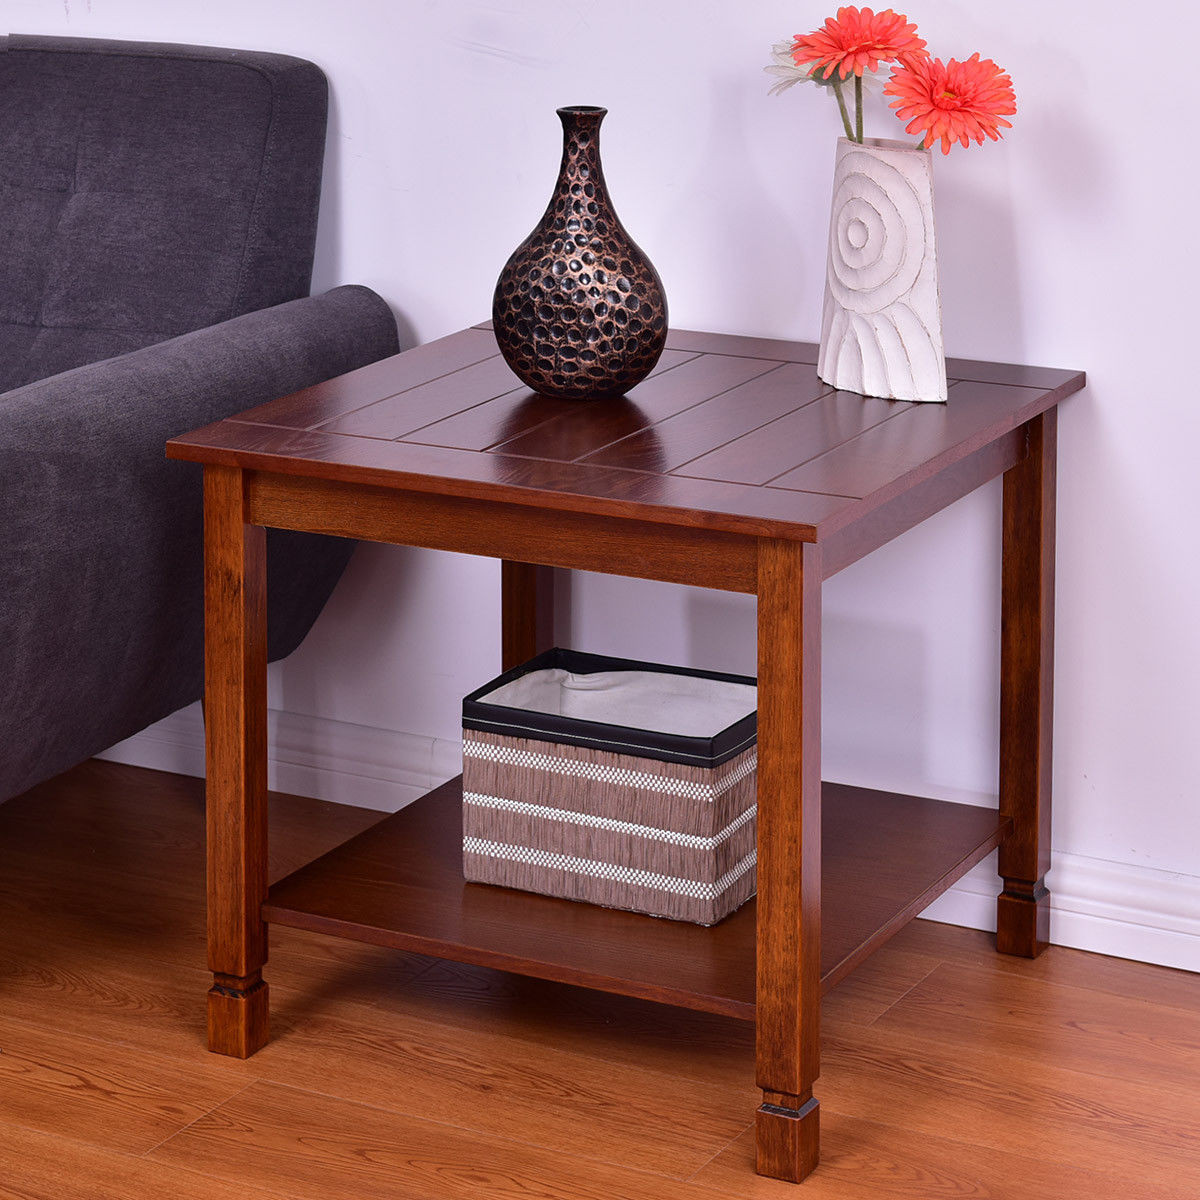 End Tables Living Room
 Giantex Wood Side Table Living Room End Table Night Stand